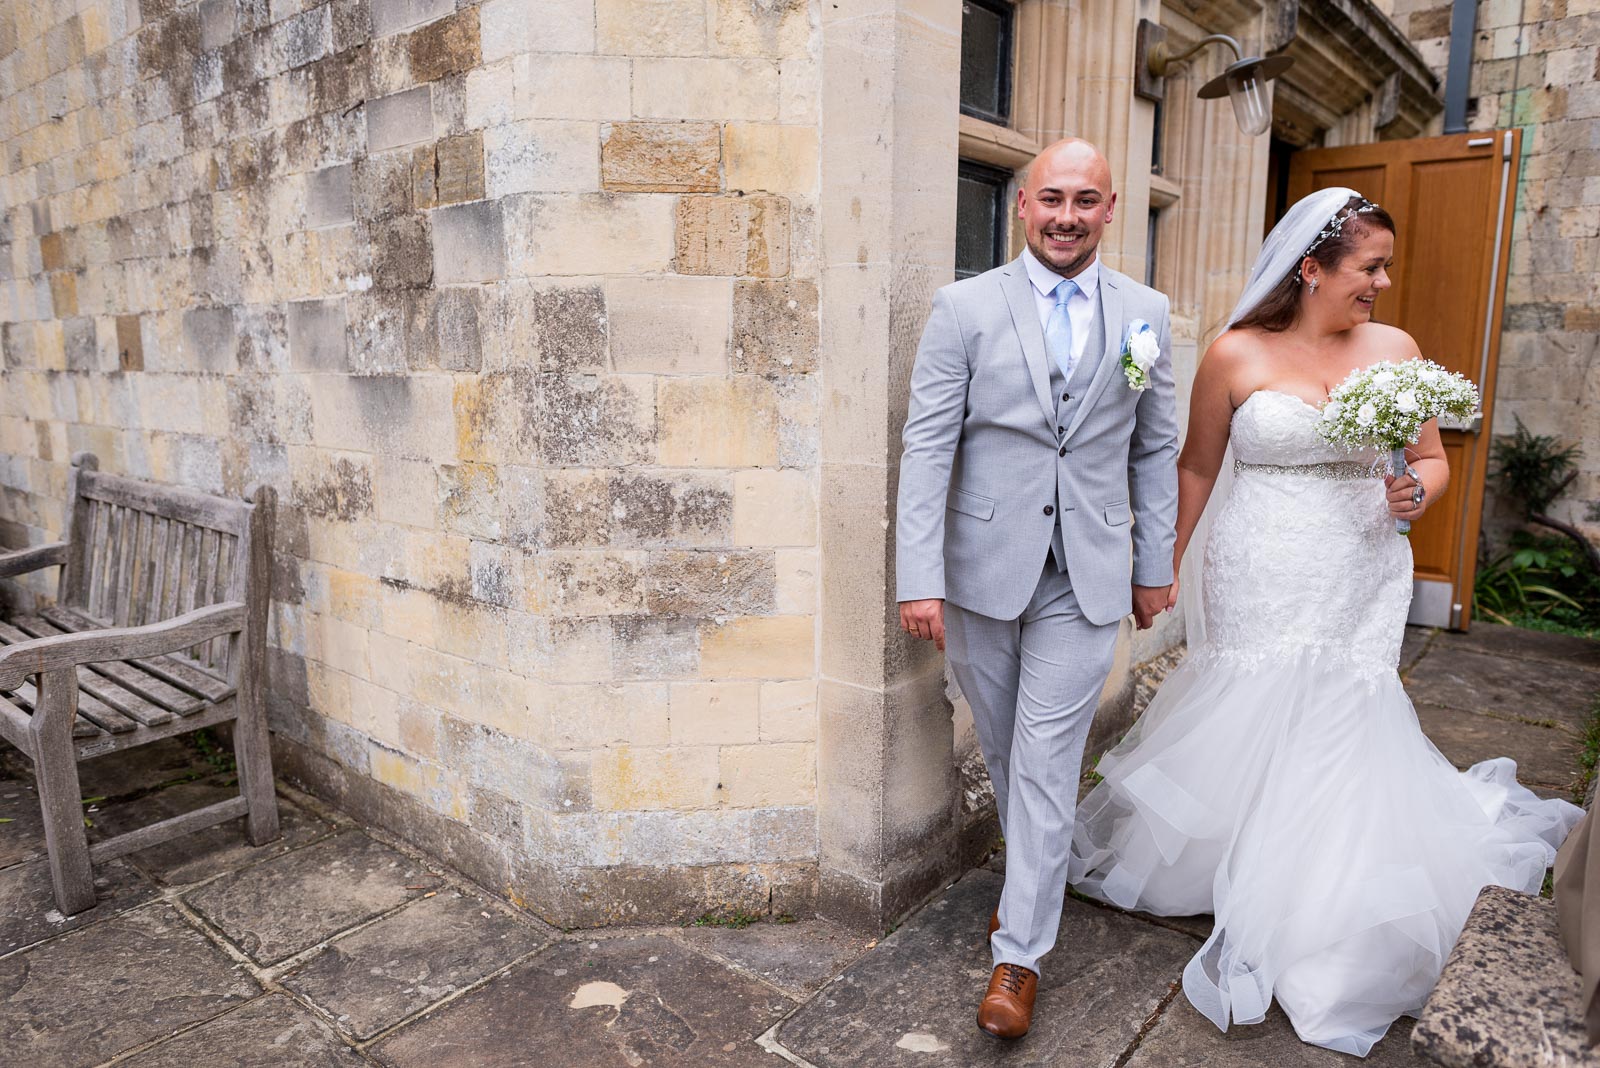 Billy and Soraya leave through the back enterence of Lewes Register Office after getting married.